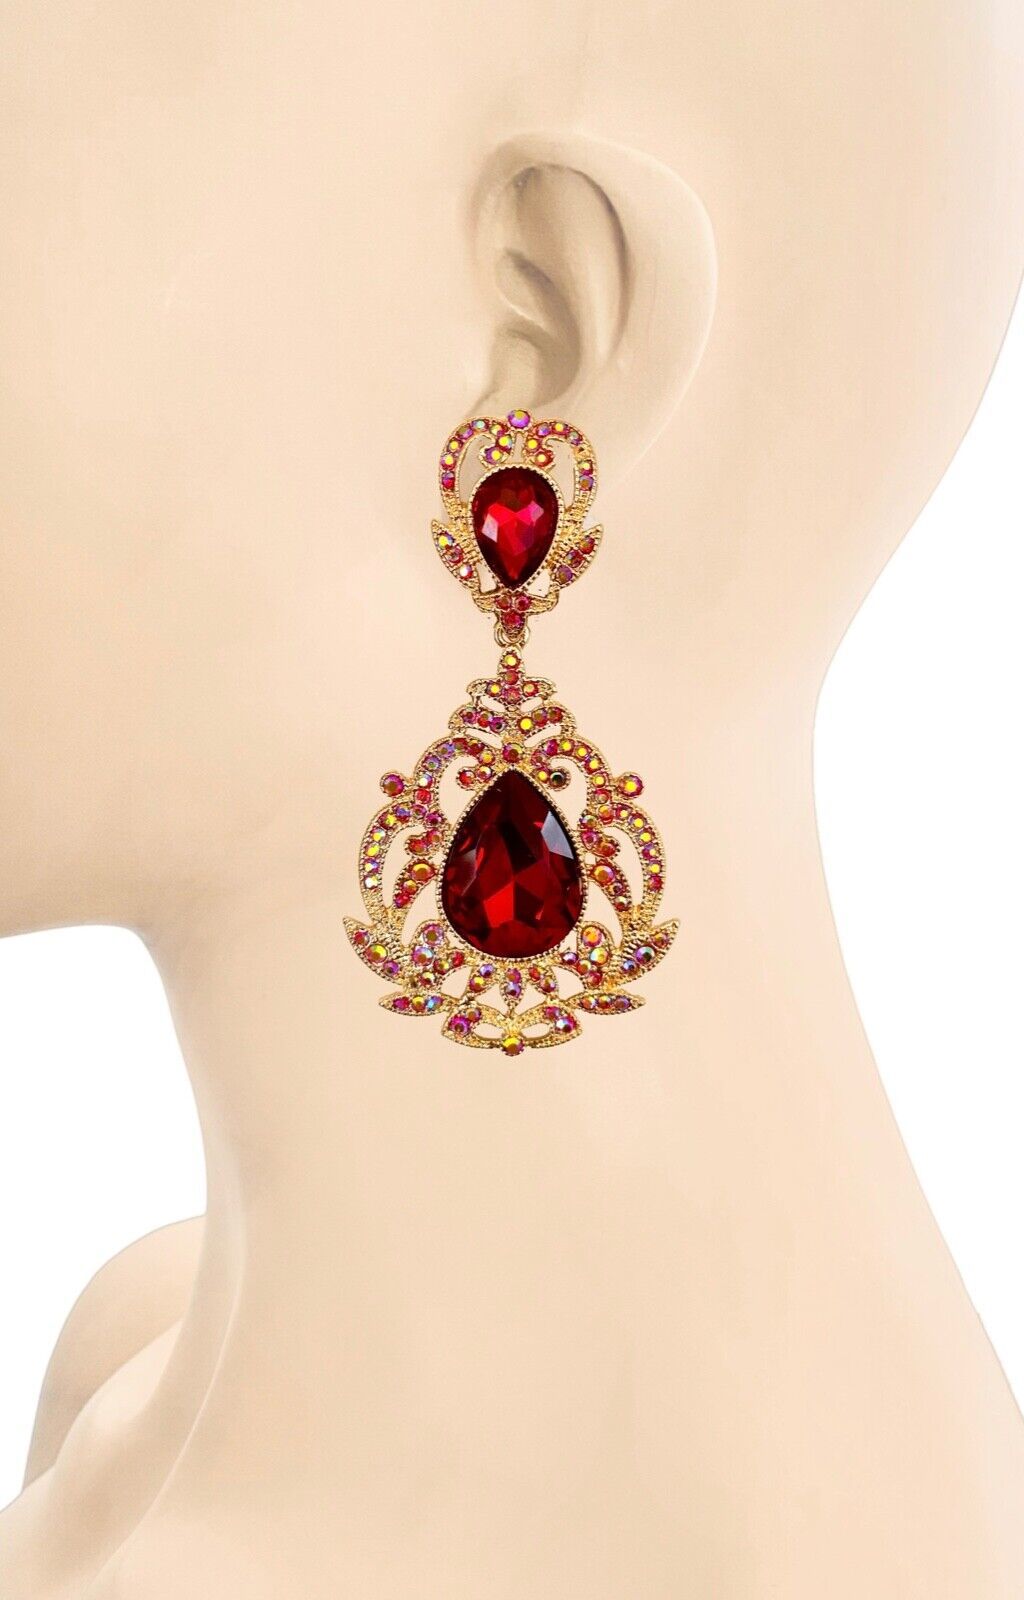 Primary image for 3.5" Long Victorian Inspired Fake Garnet Red Crystal Evening Clip On Earrings